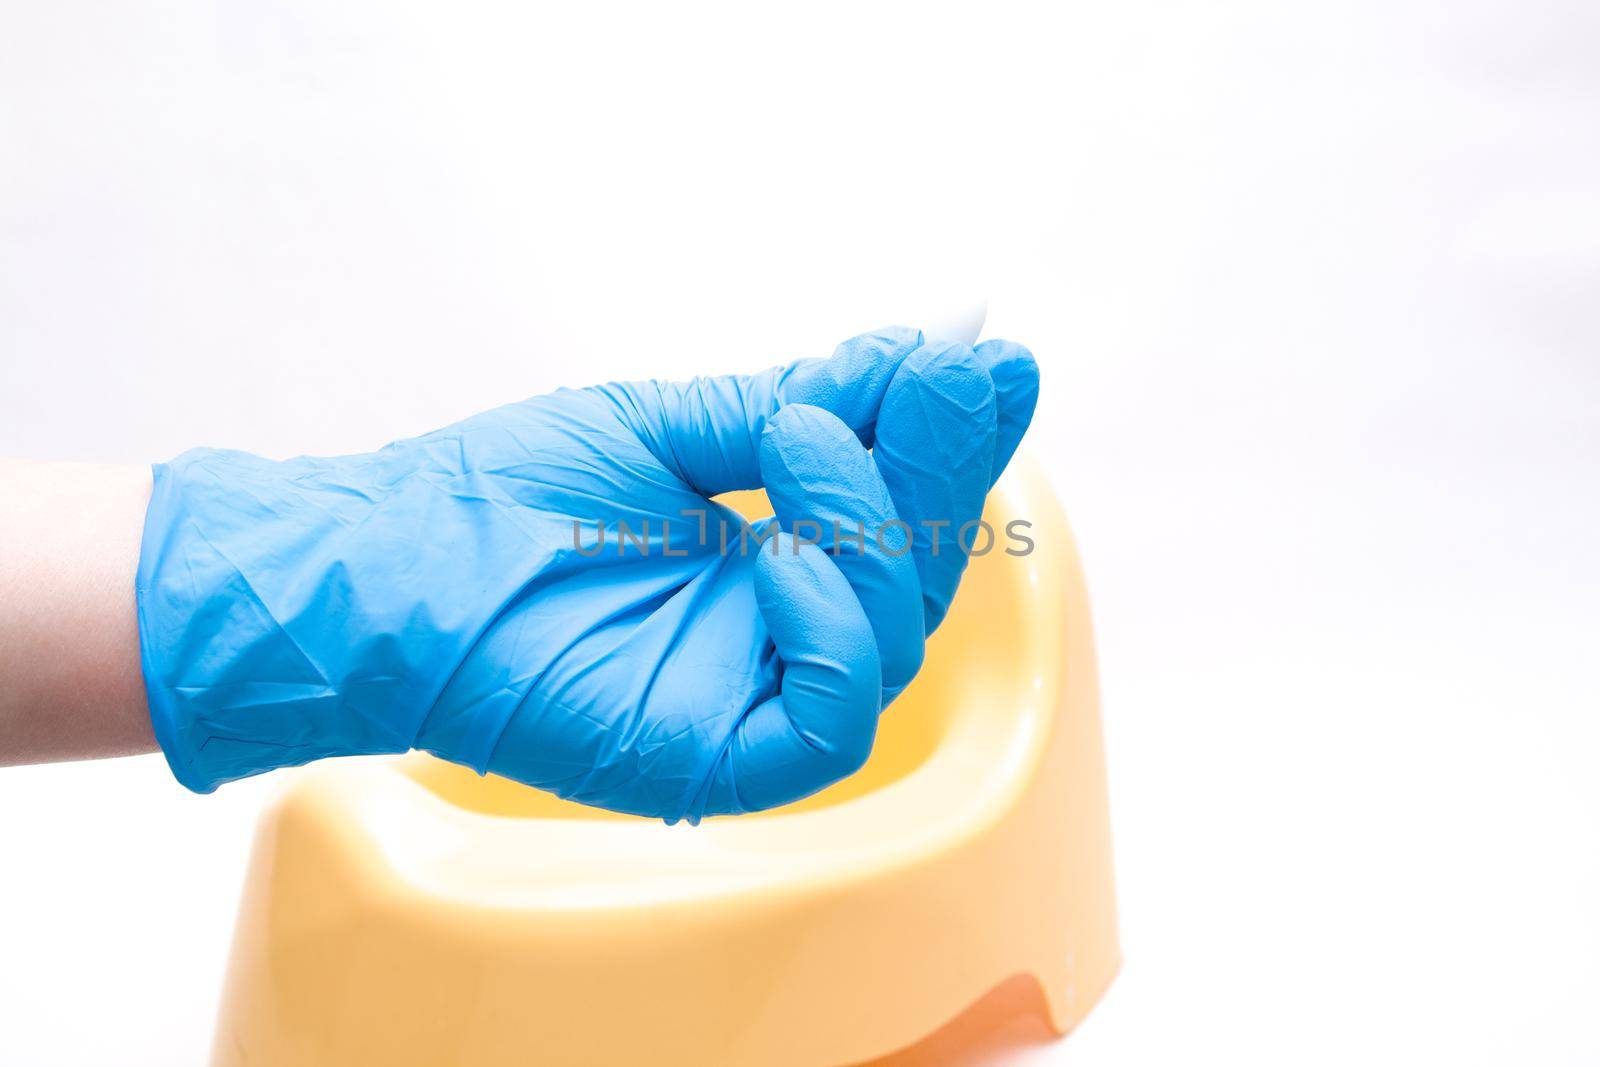 a hand in a disposable blue medical glove holds a test jar with a white spoon for collecting feces, in the background is a yellow children's pot, white background, copy space by natashko